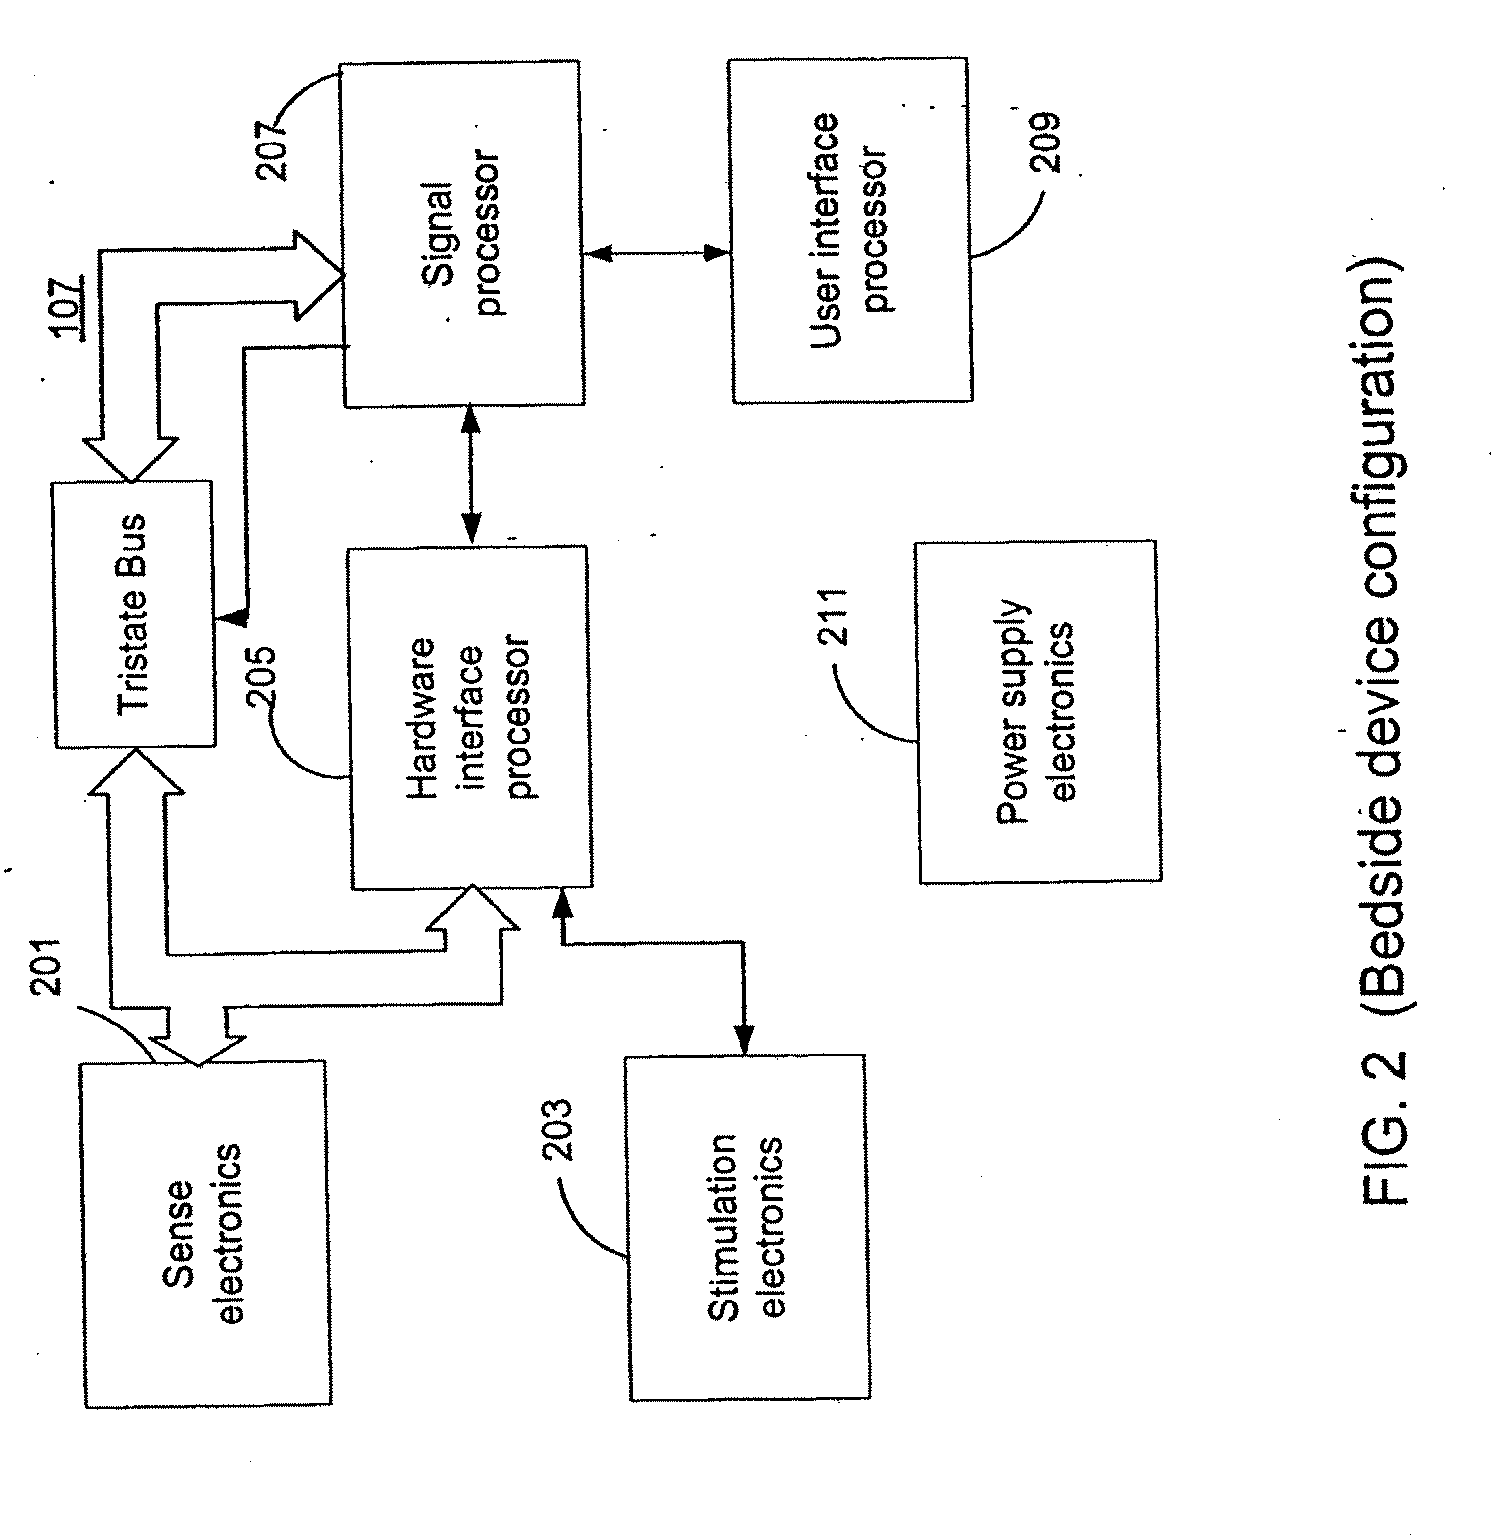 Phase Shifting of Neurological Signals in a Medical Device System